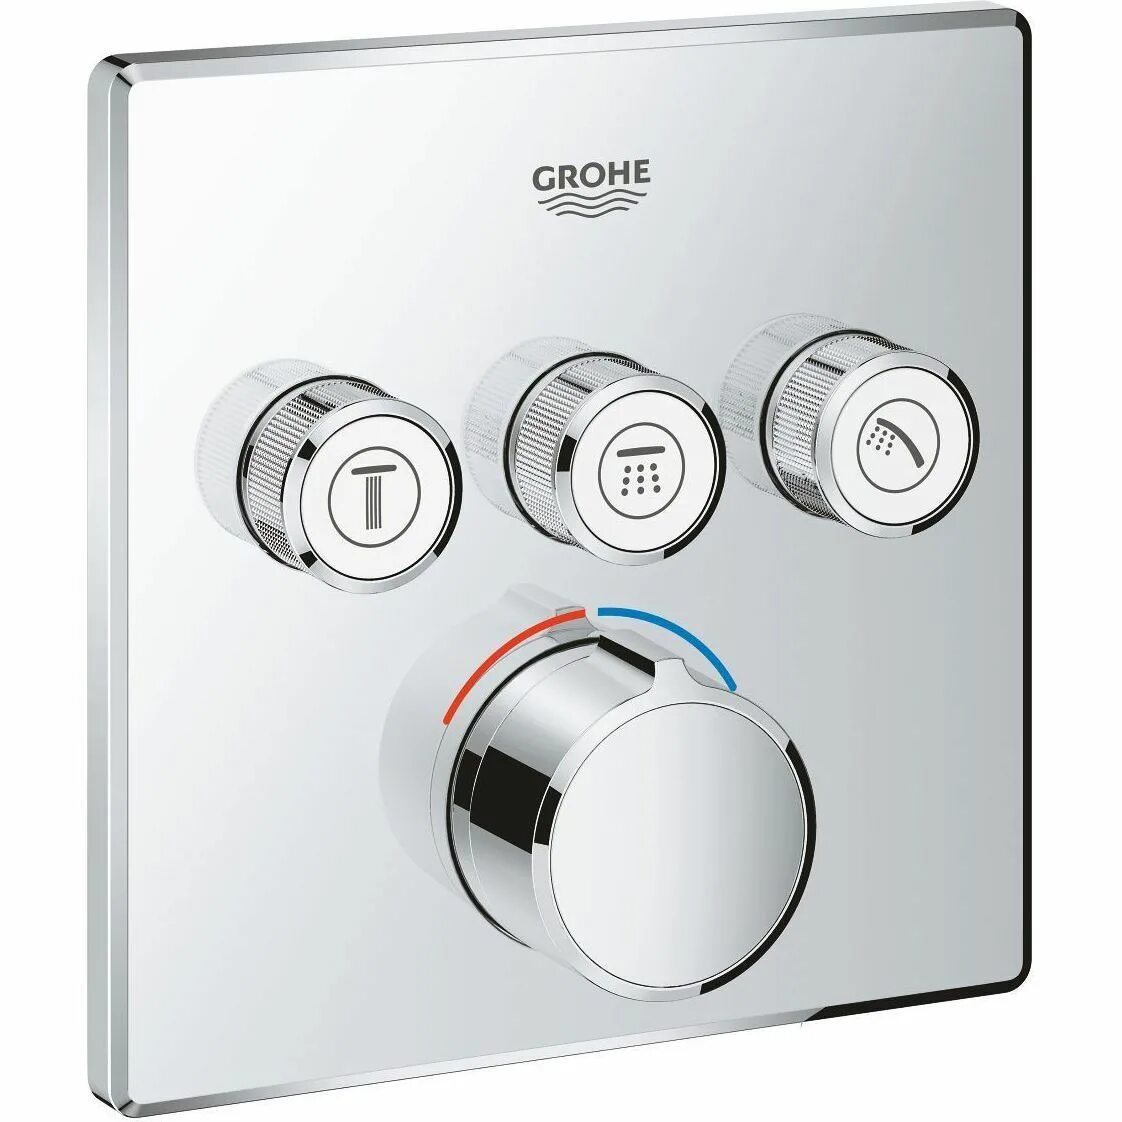 Grohe Grohtherm SMARTCONTROL 29124000. 29149000 Grohe. Термостат Grohe Grohtherm SMARTCONTROL 29124000 для душа. Grohe SMARTCONTROL 29148000.